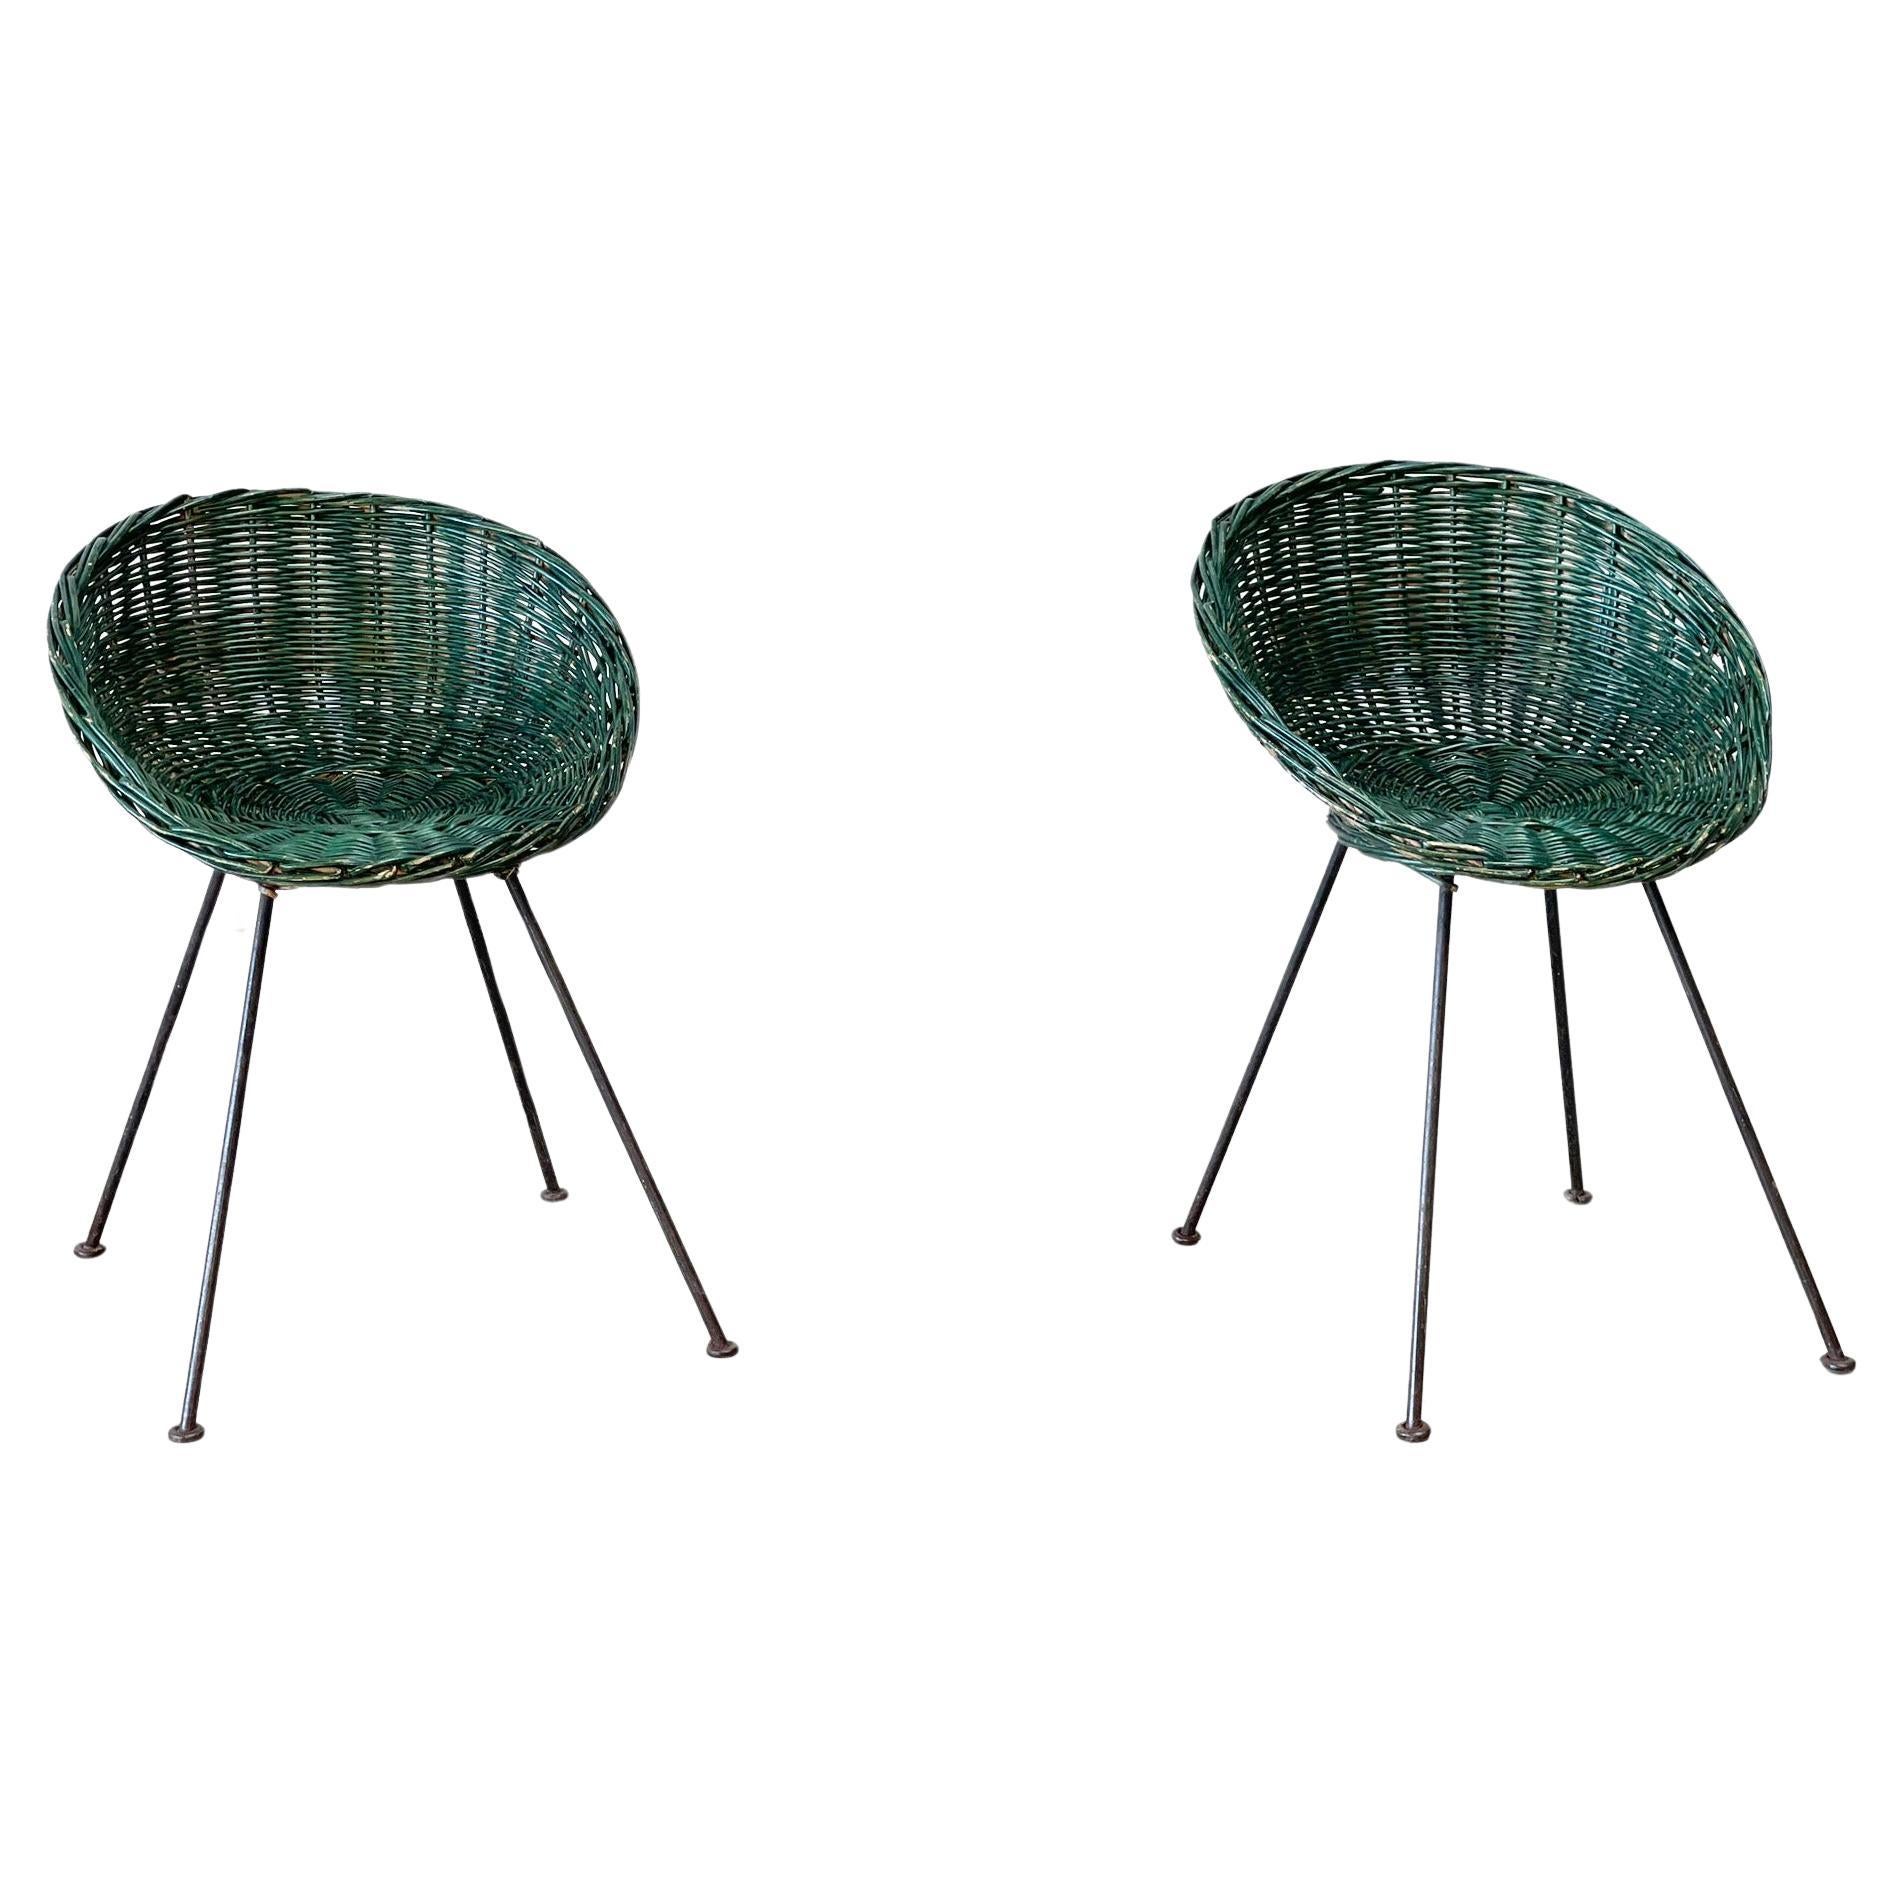 Set of two green rattan easy chairs